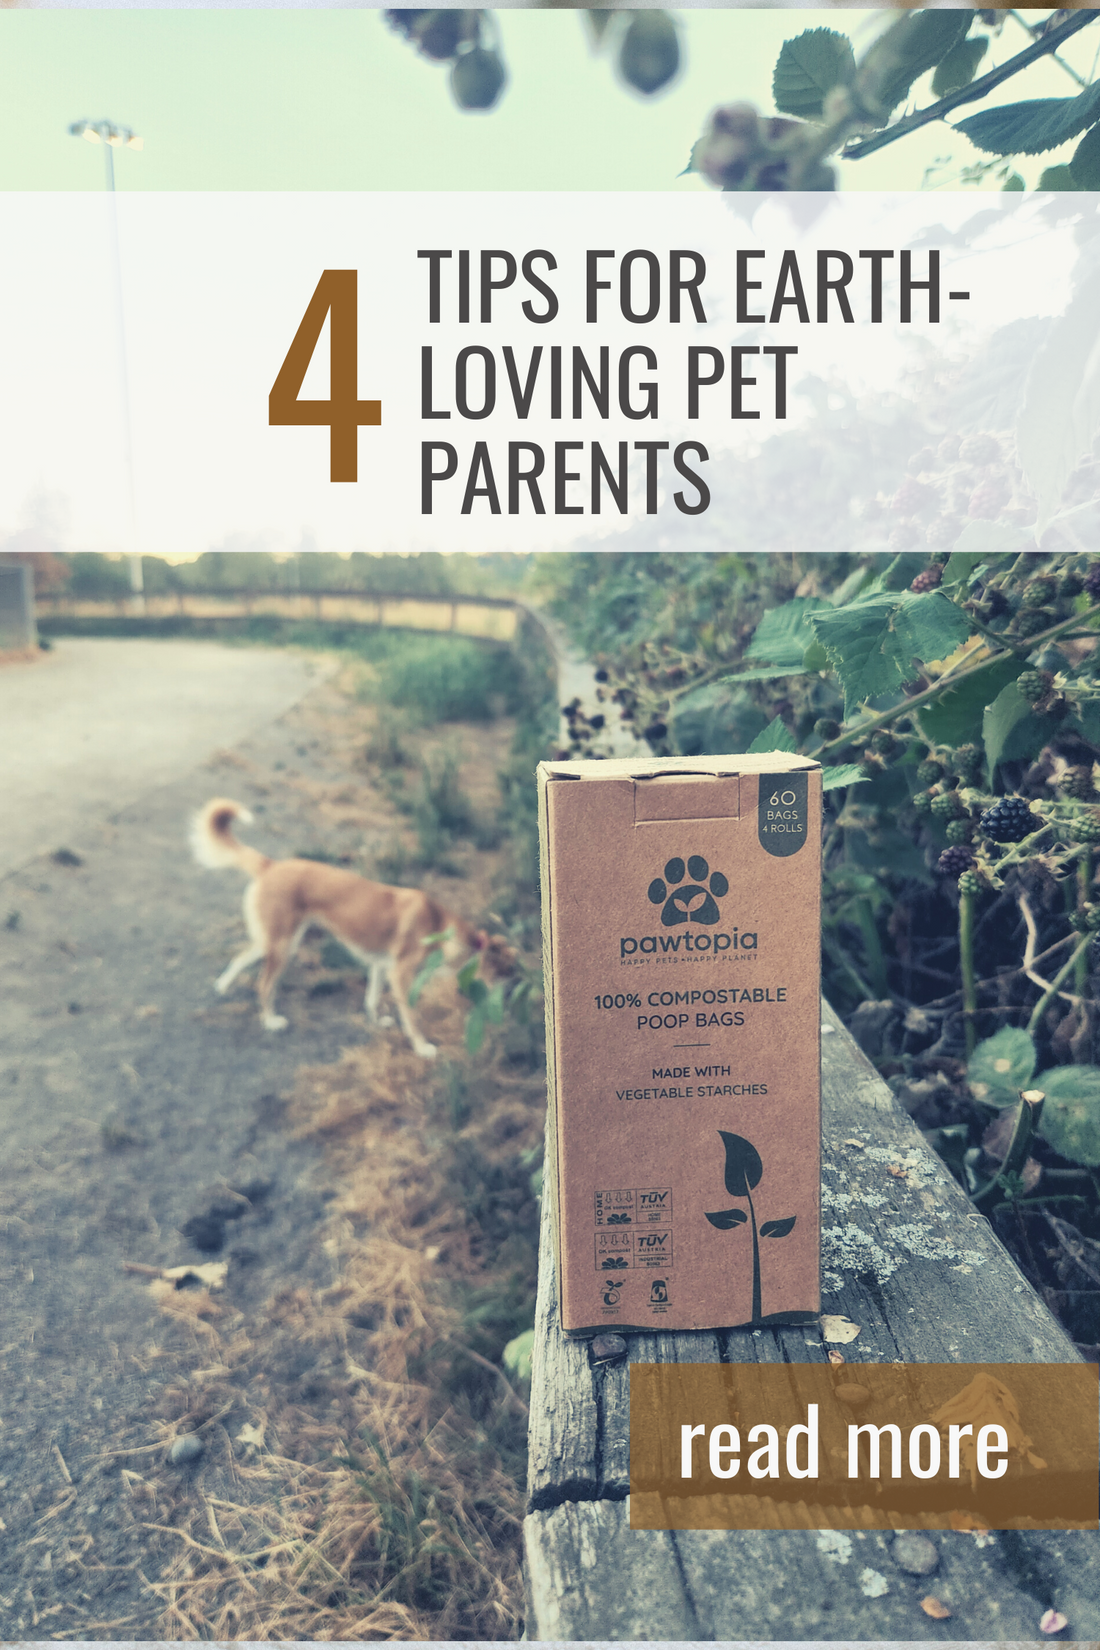 How Can You and Your Pet be An Eco-Friendly Pawtizen?